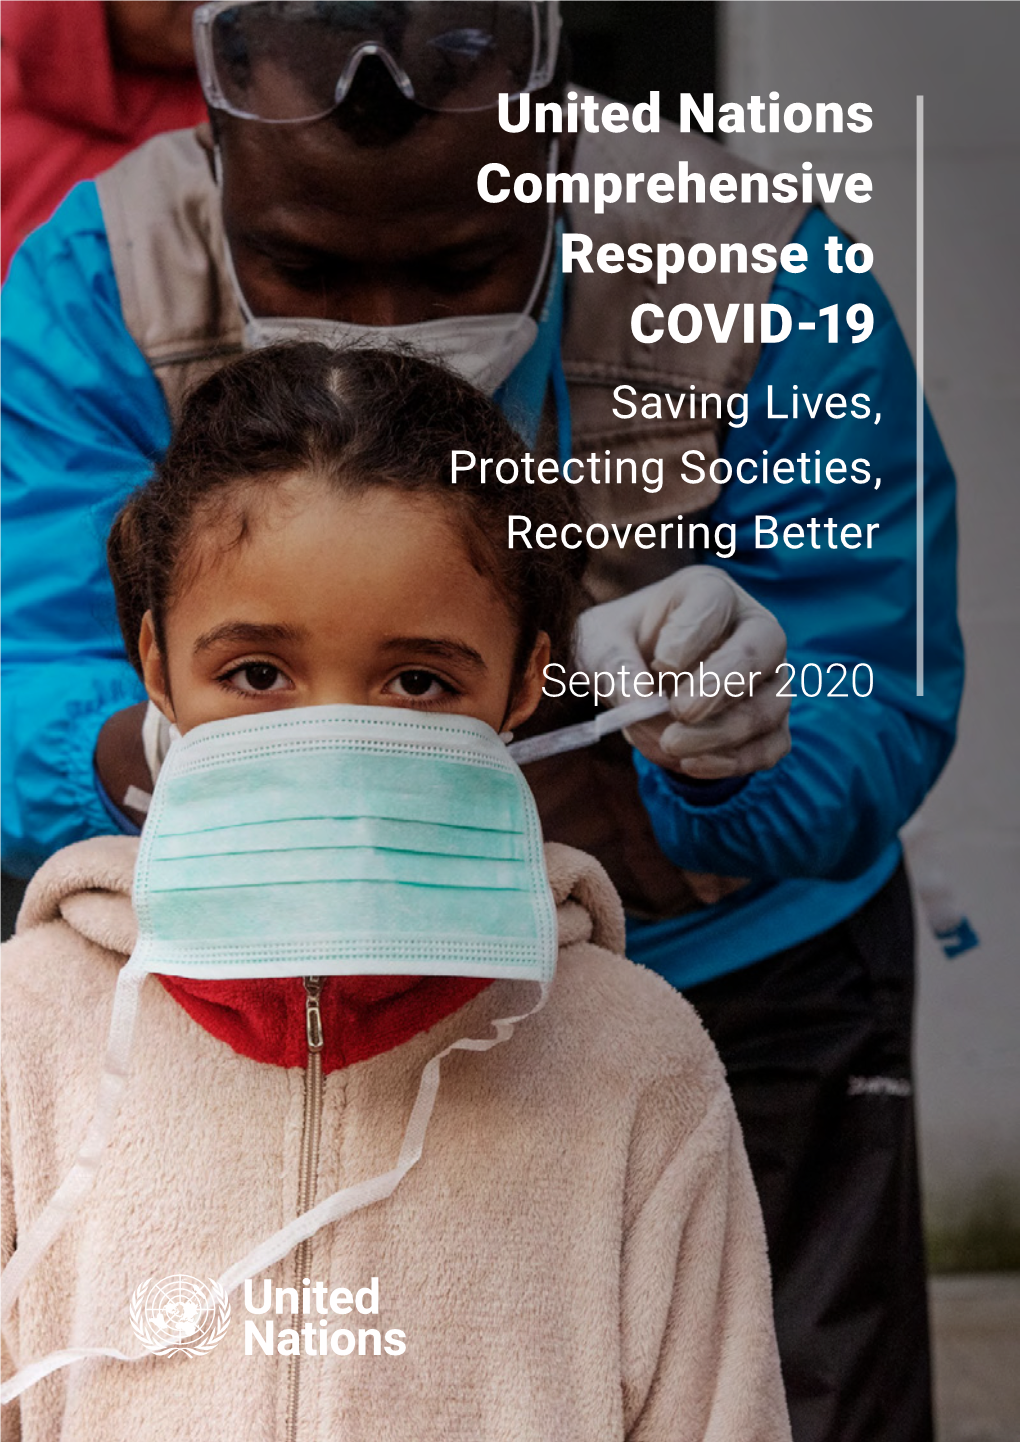 United Nations Comprehensive Response to COVID-19 Saving Lives, Protecting Societies, Recovering Better